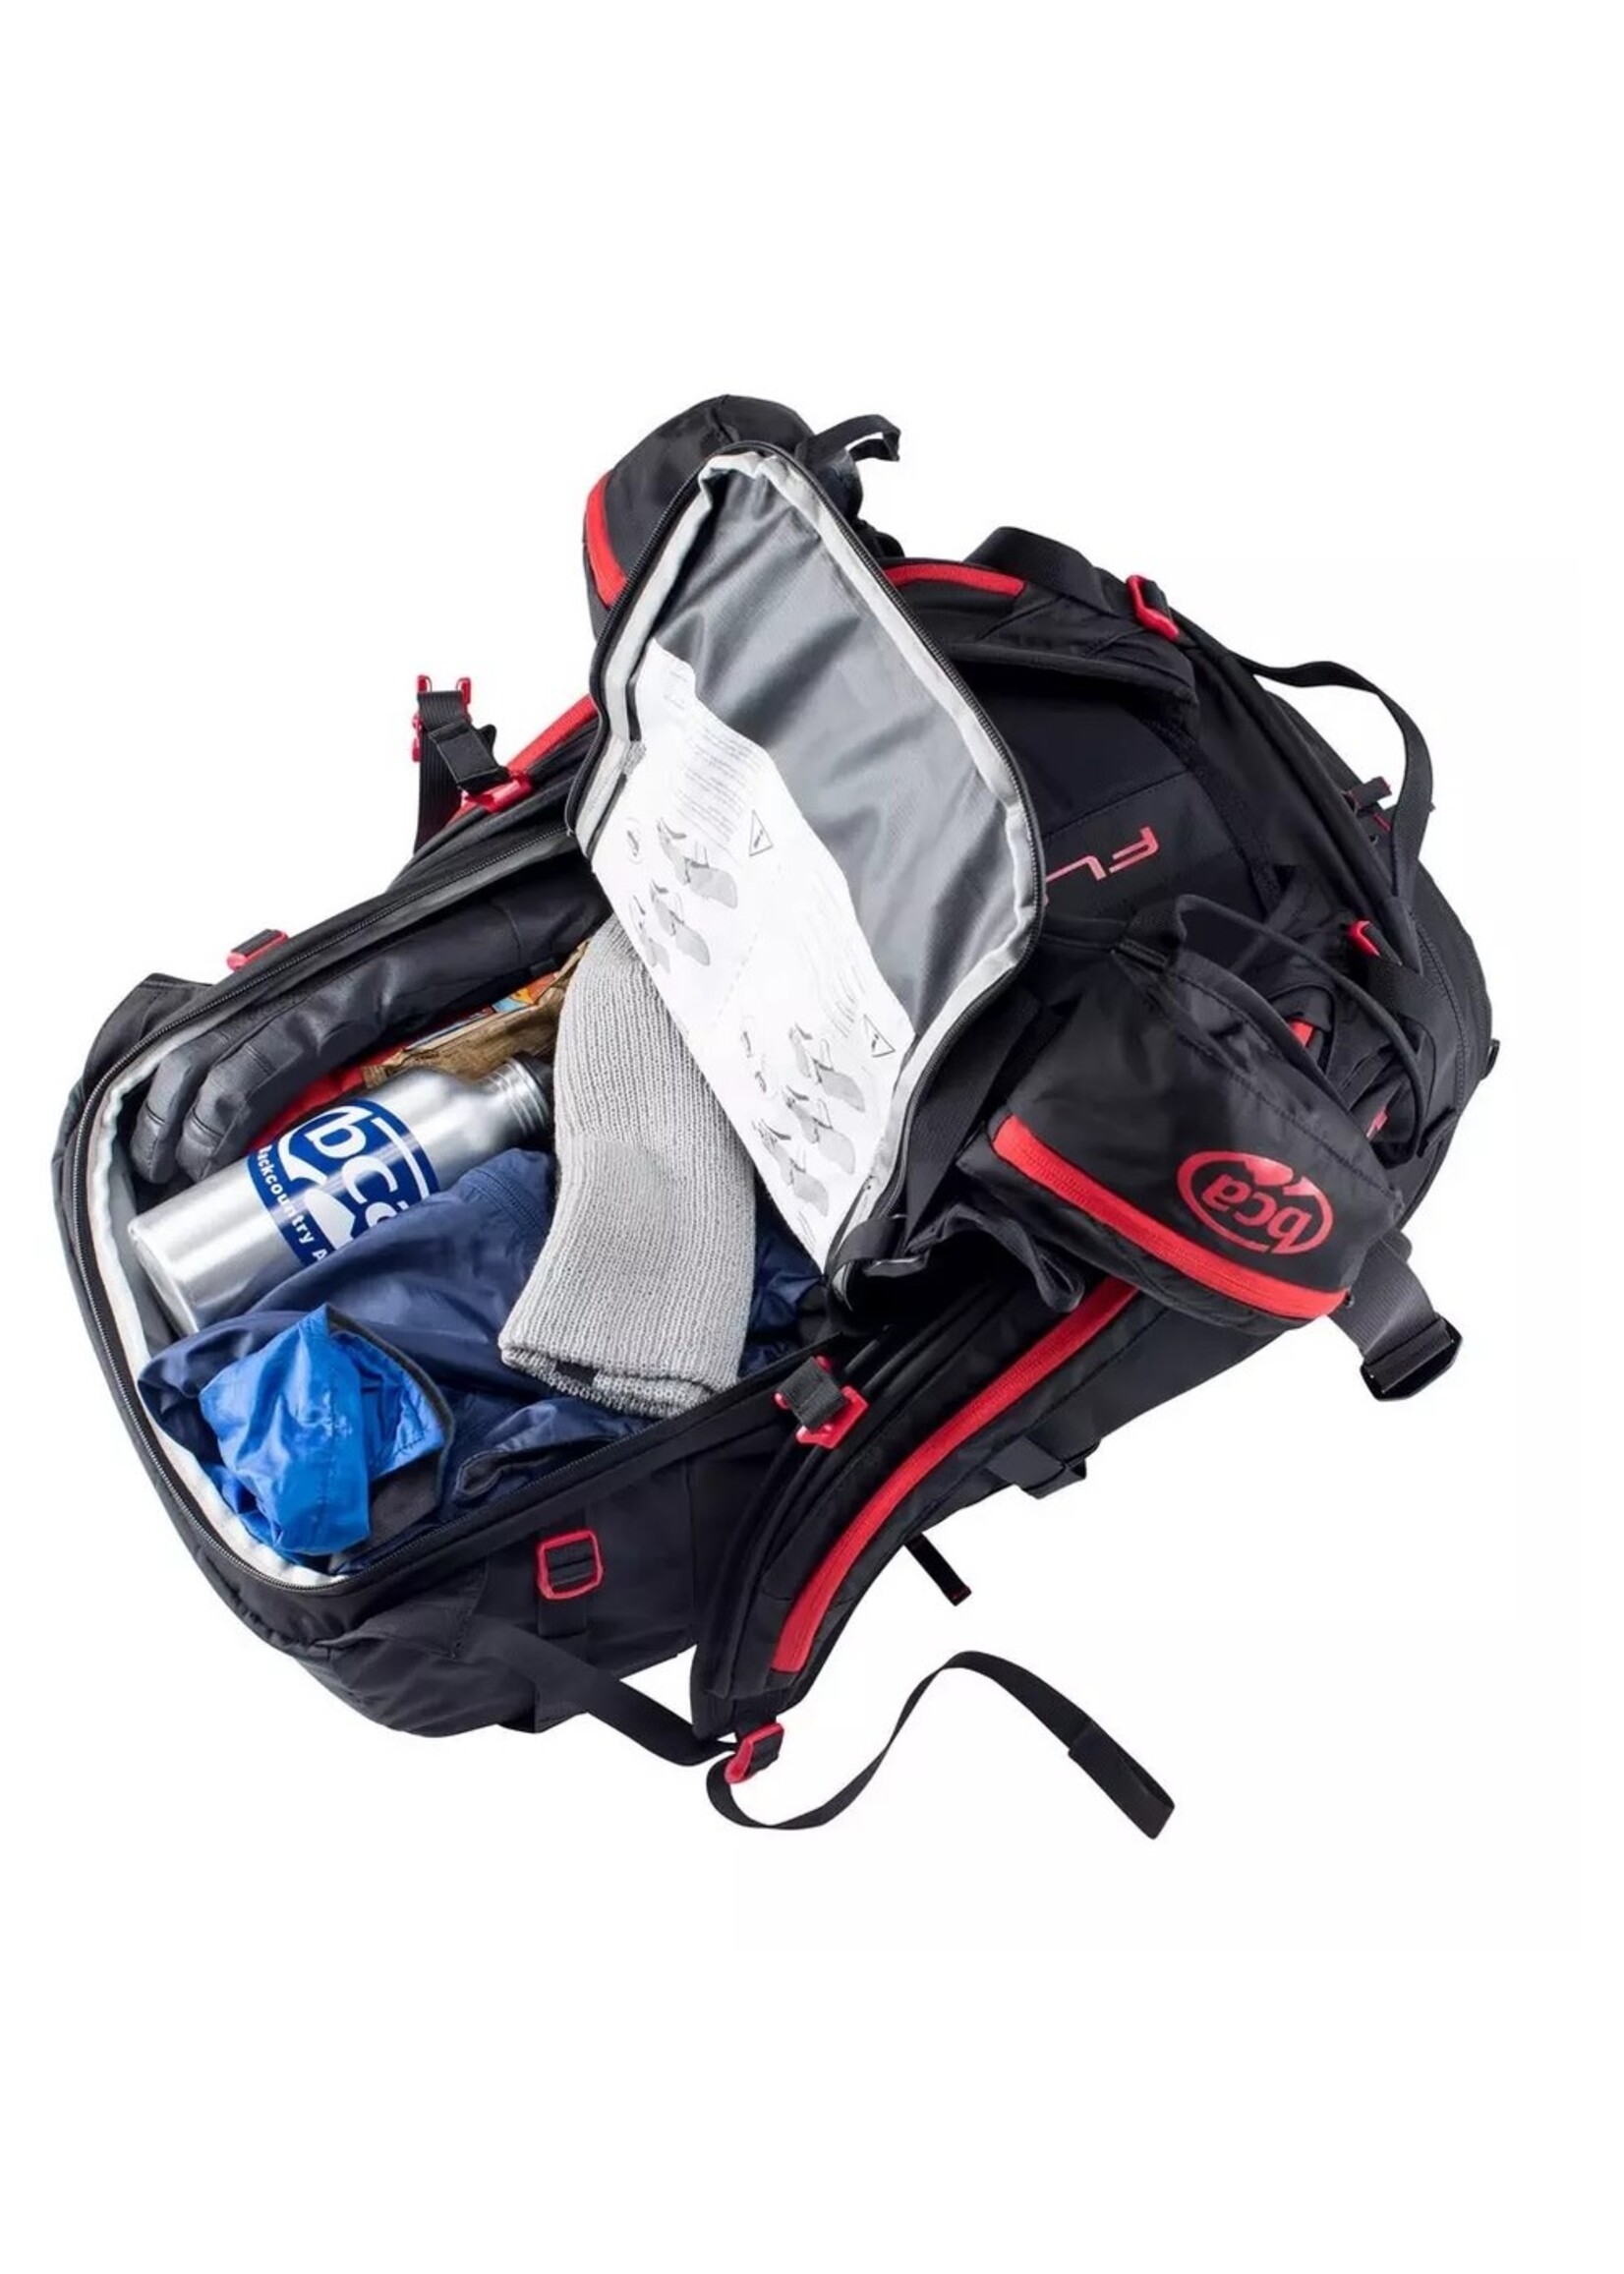 Backcountry Access Sac gonflable à avalanche BCA Float 42 2.0